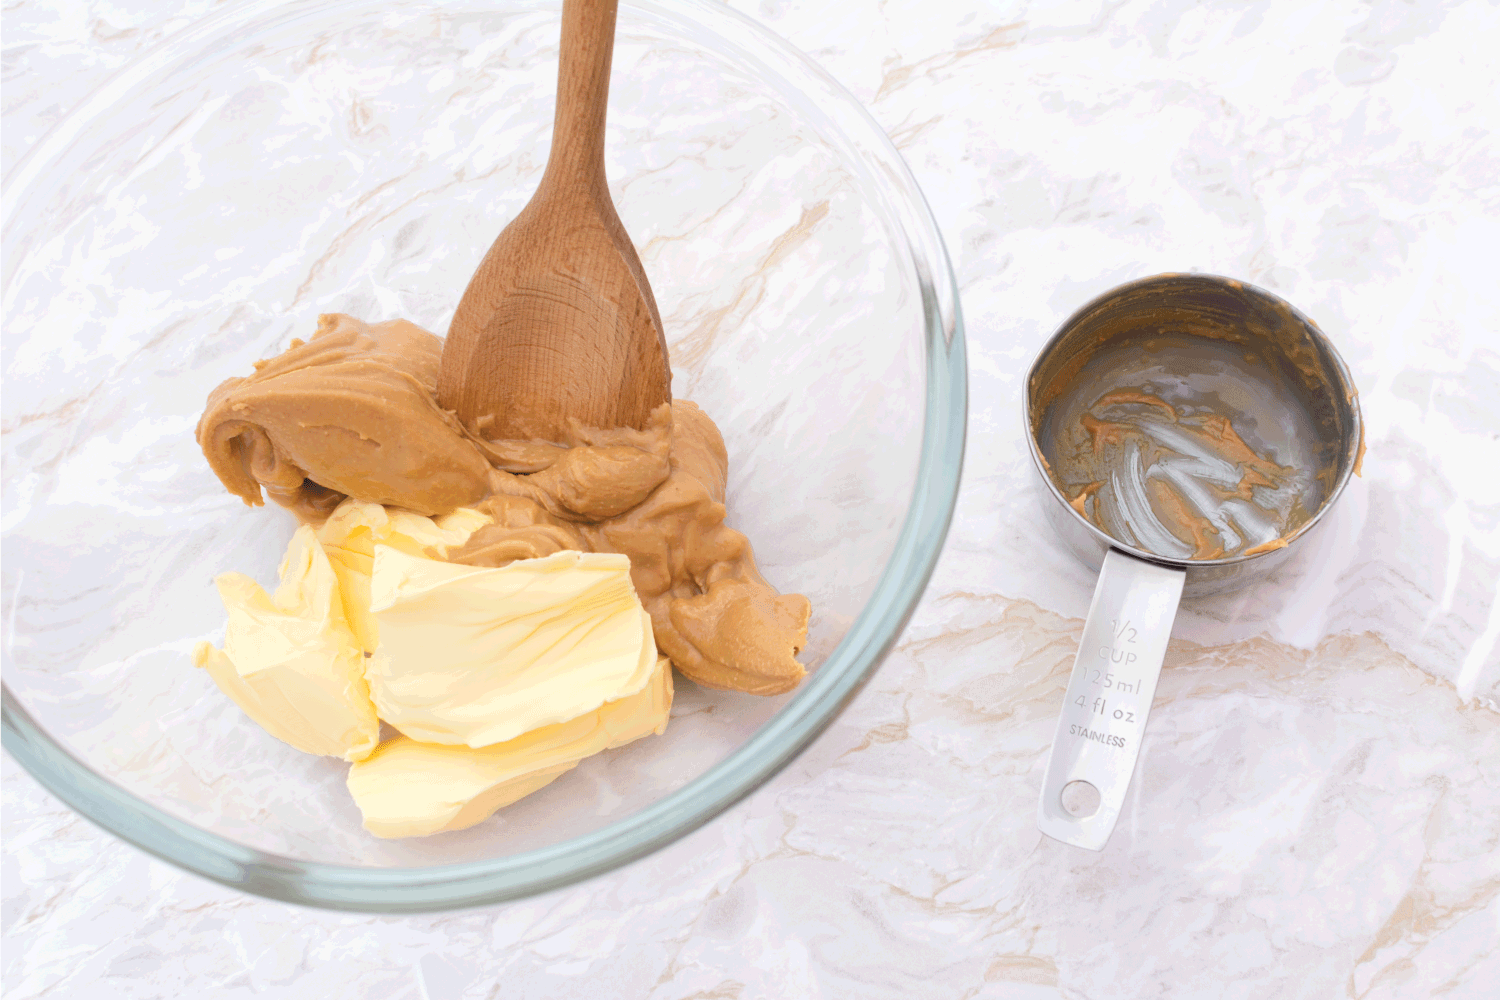 Wooden spoon mixing together smooth peanut butter and butter. Dirty measuring cup sits beside bowl on kitchen counter.